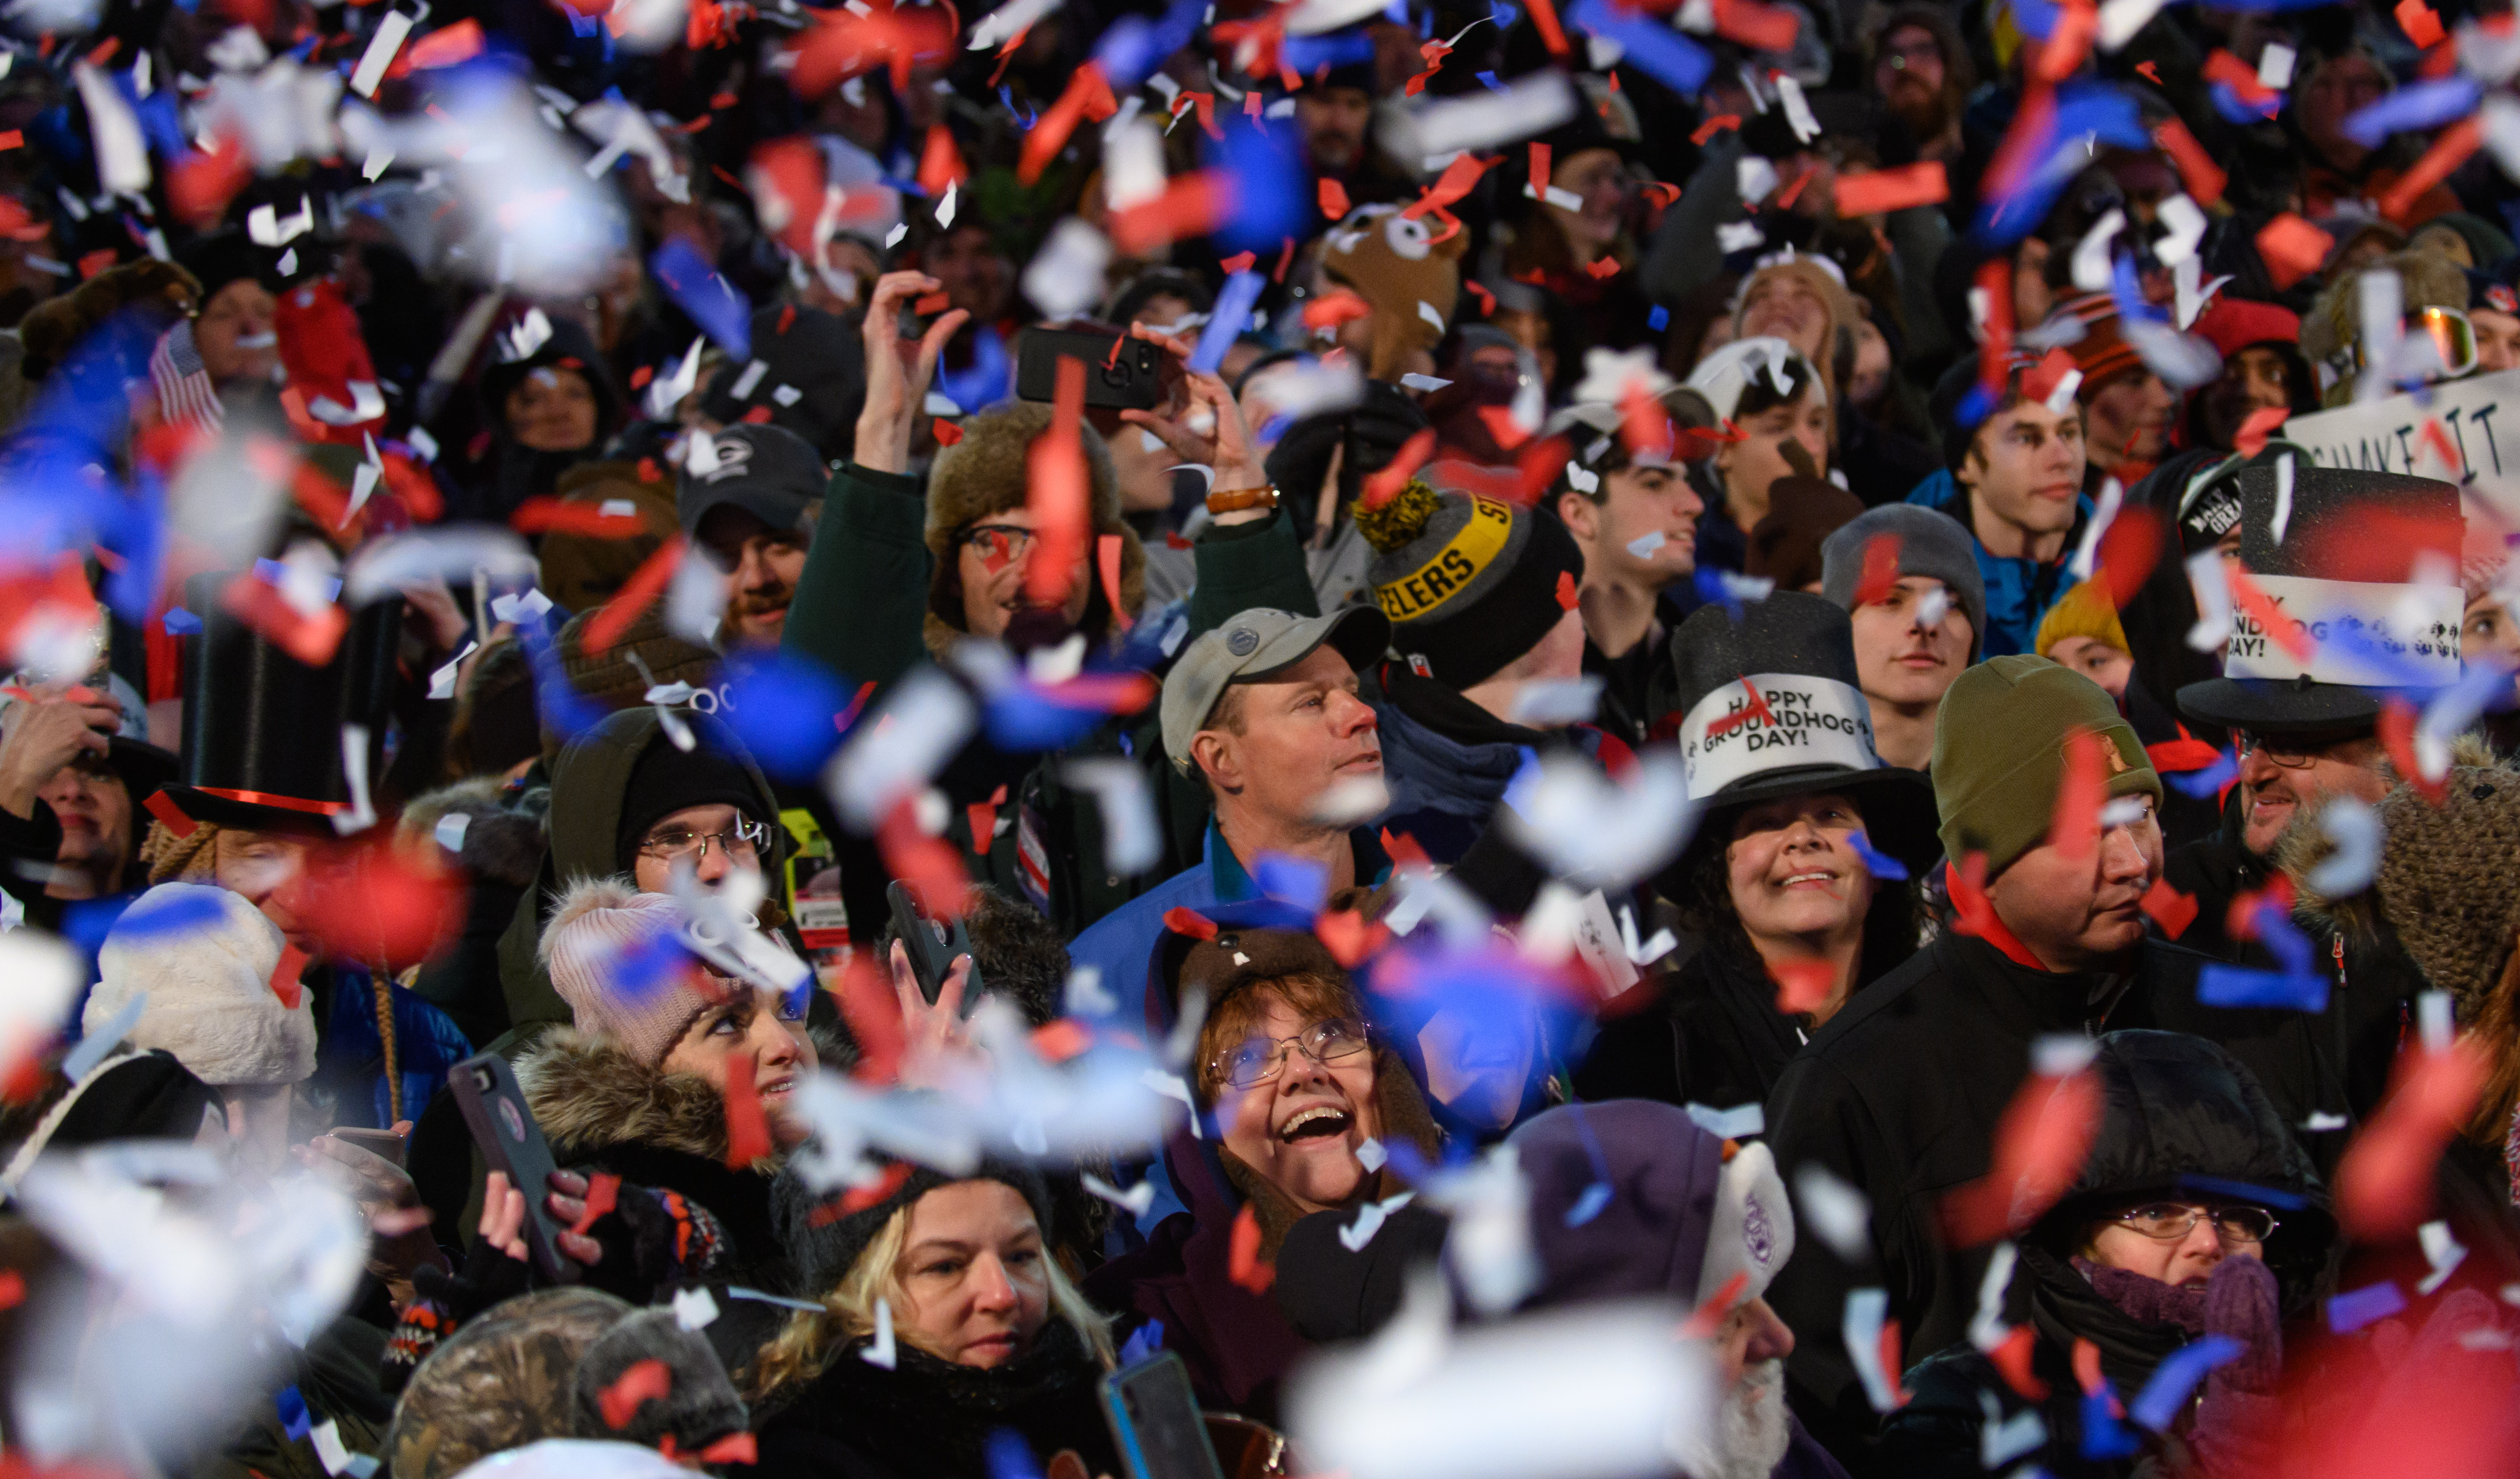 Crowd of mostly blurry faces with red, white, and blue confetti in foreground.